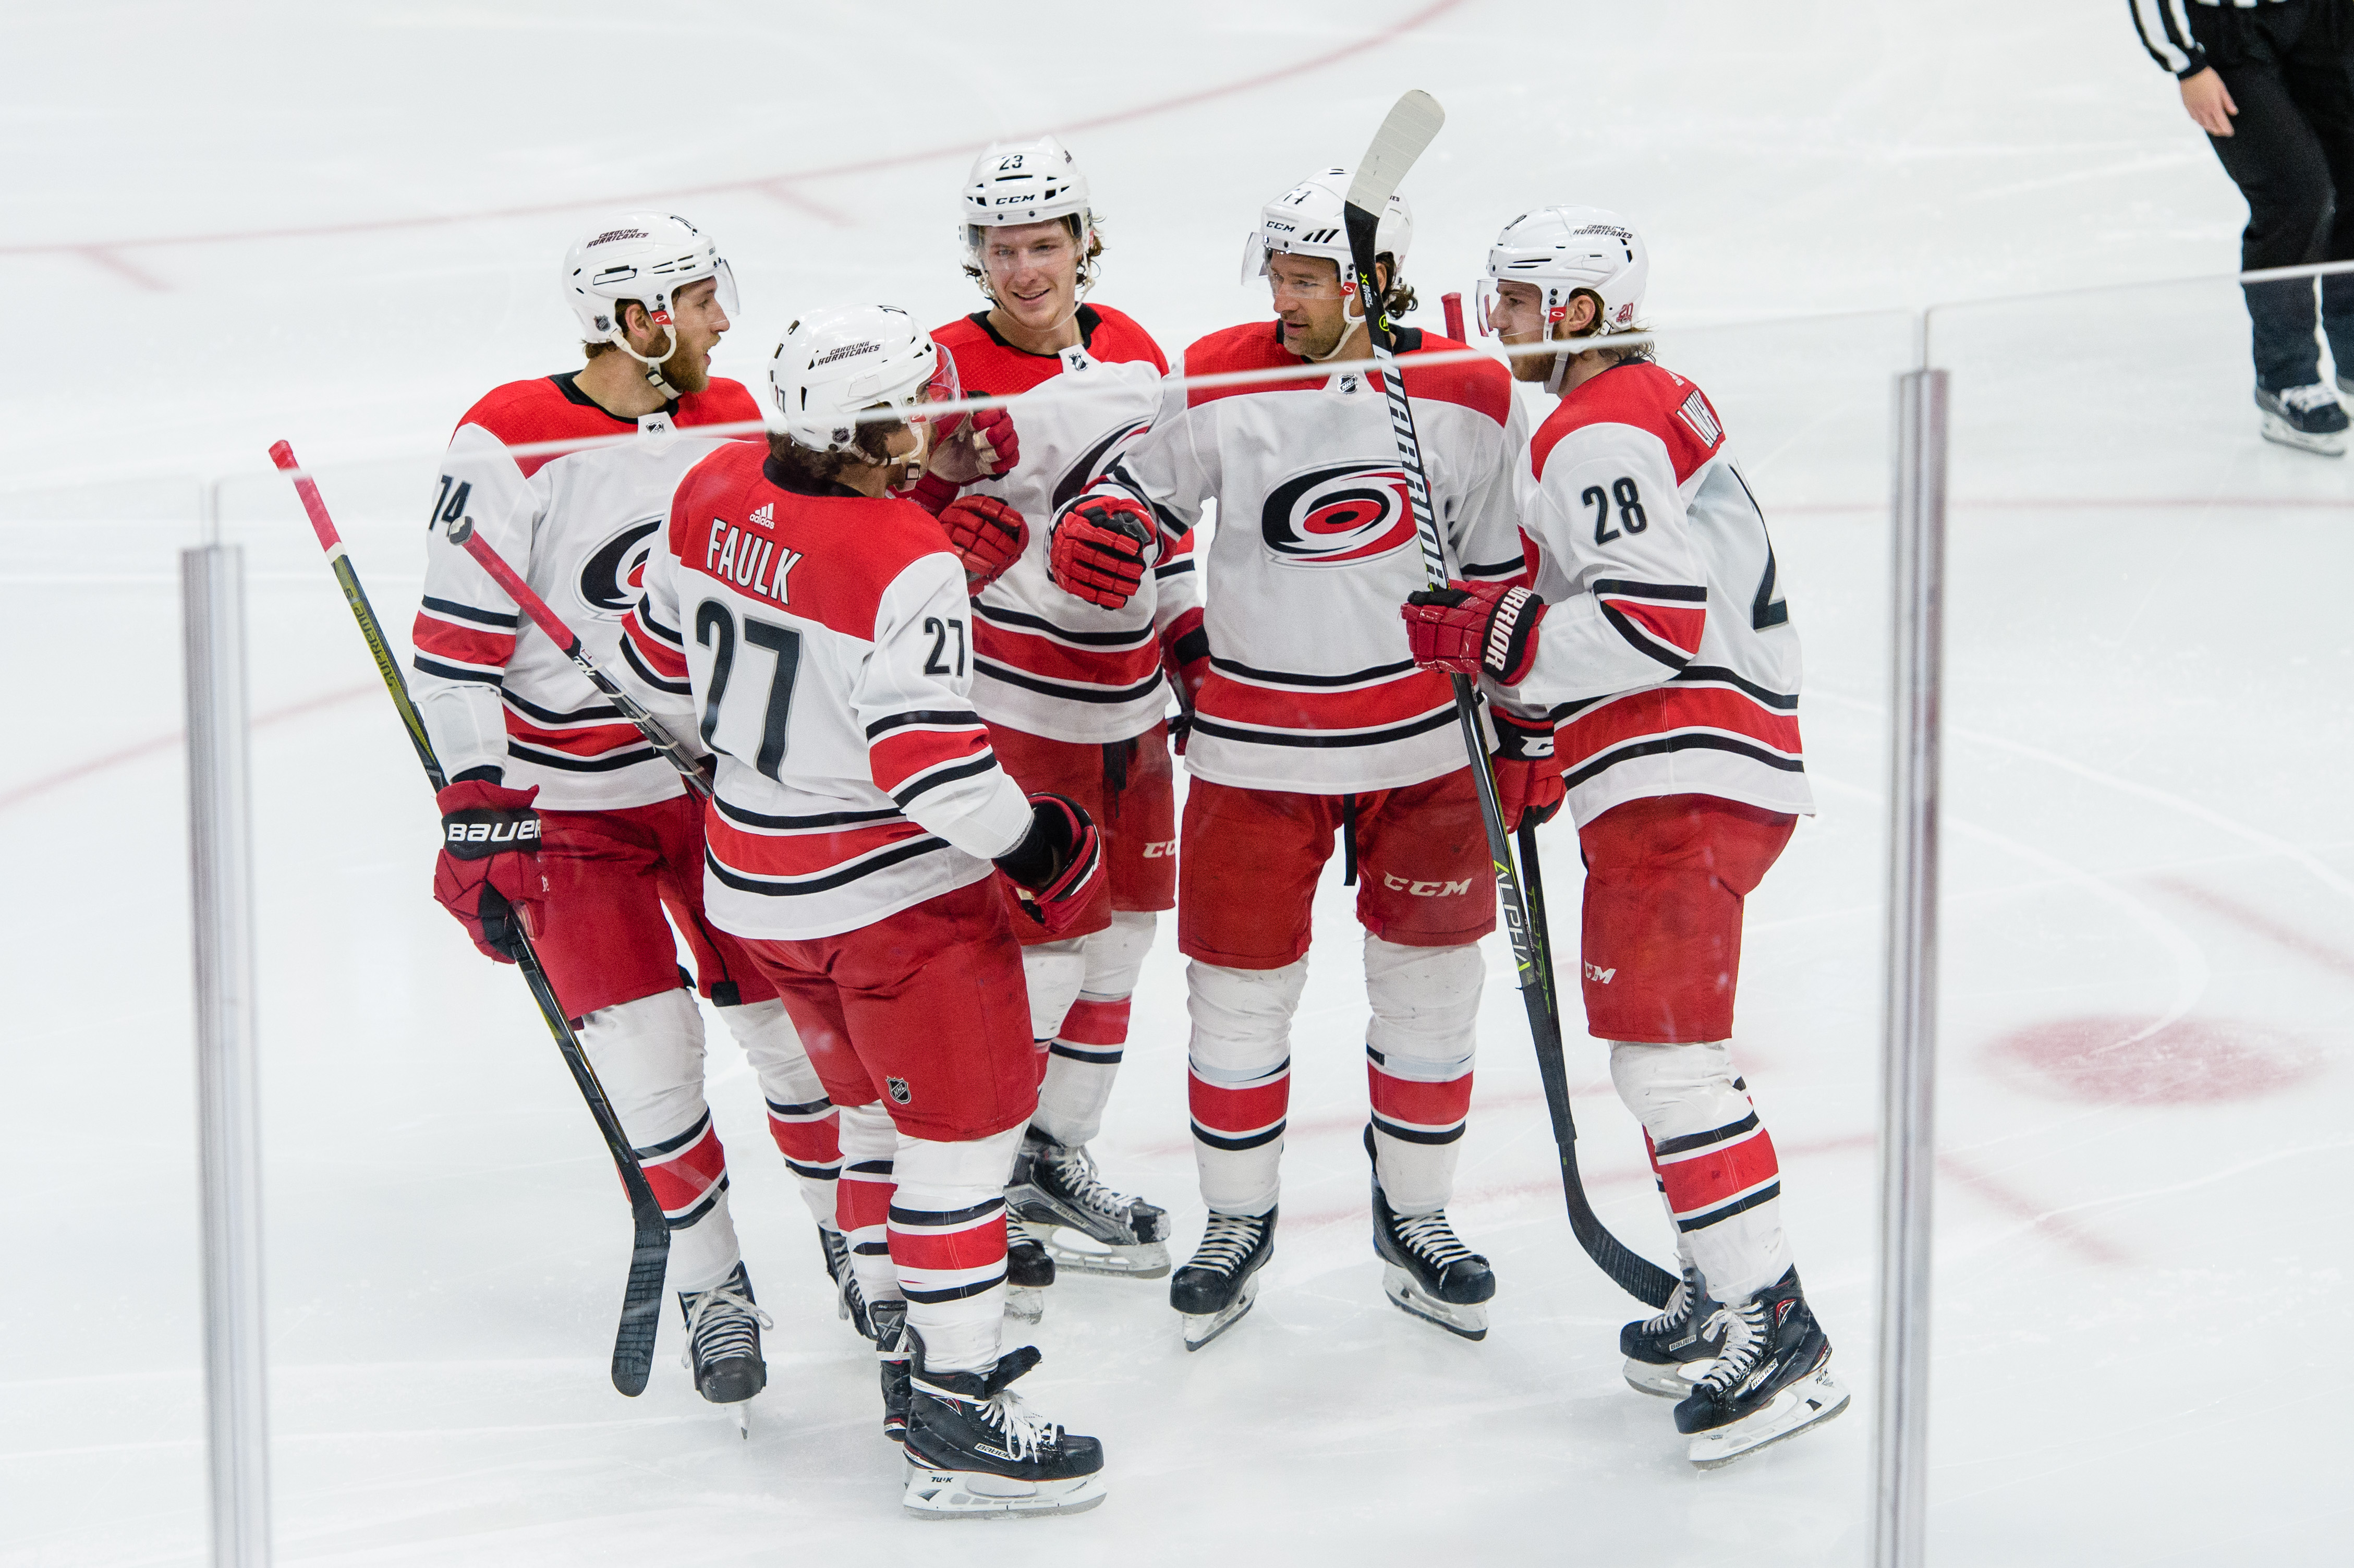 The Carolina Hurricanes Rickrolled their fans with this amazing tweet